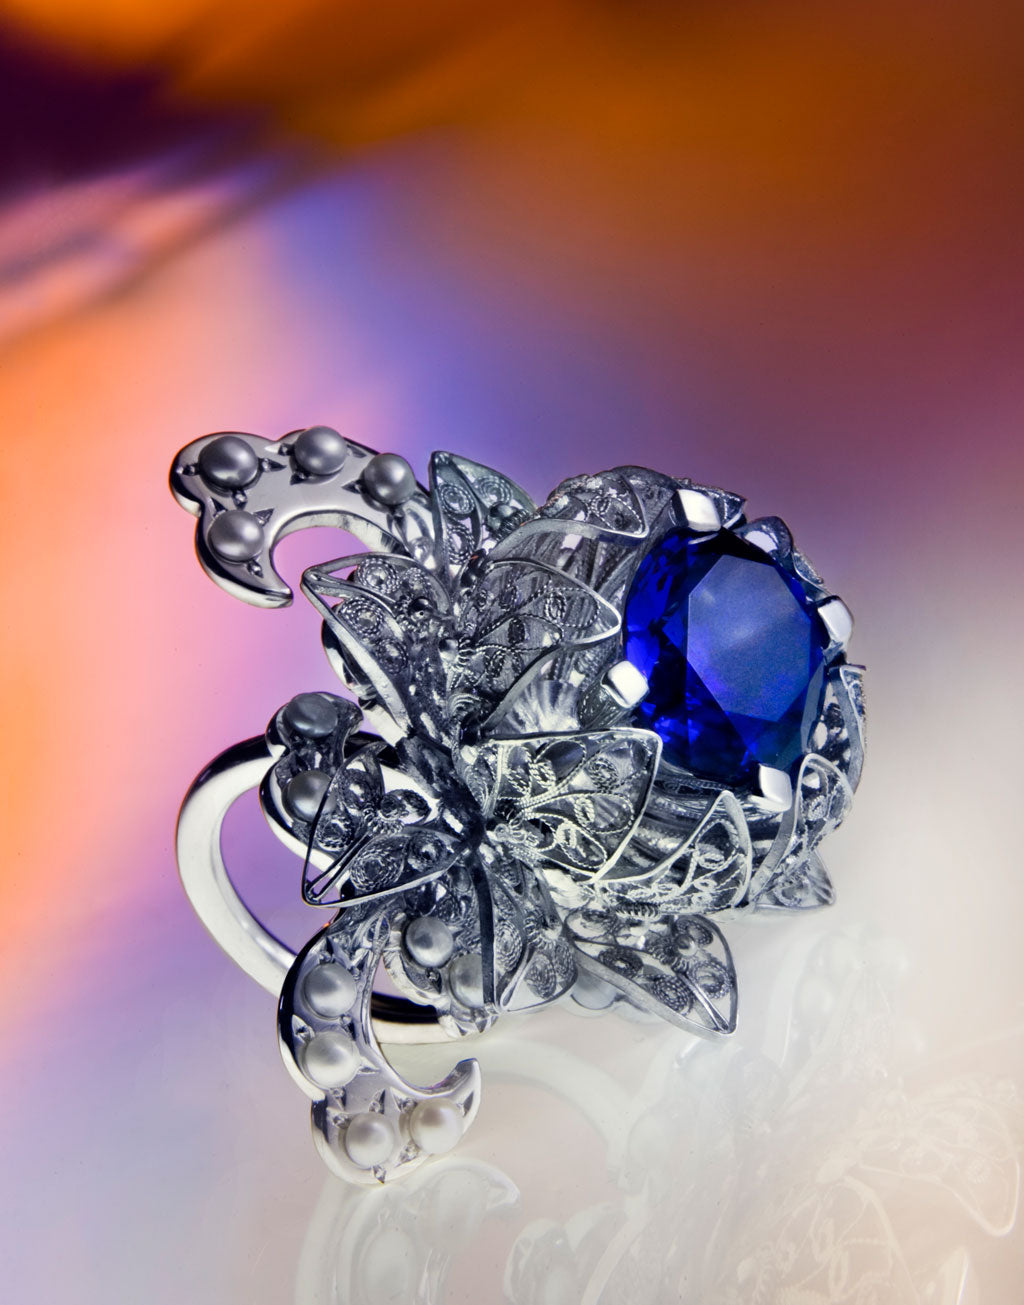 A one-of-a-kind filigree cocktail ring, highly hand-crafted using ethical pearls and fair-traded tanzanite